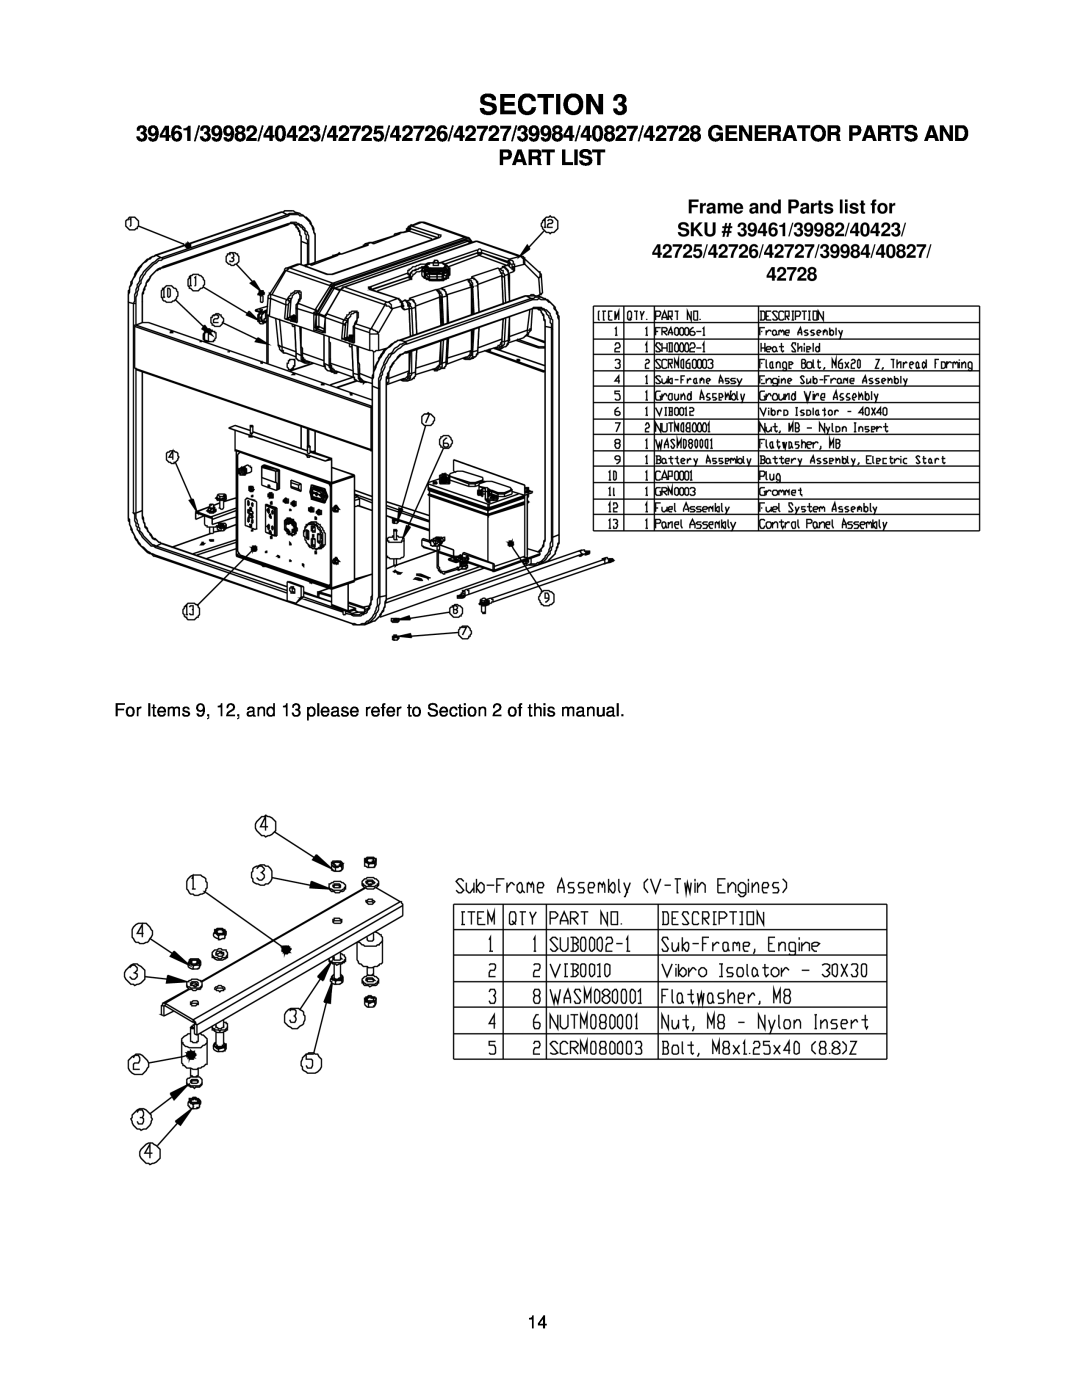 Chicago Electric 42723, 42727, 40814, 42724, 42725 Part List, Section, For Items 9, 12, and 13 please refer to of this manual 